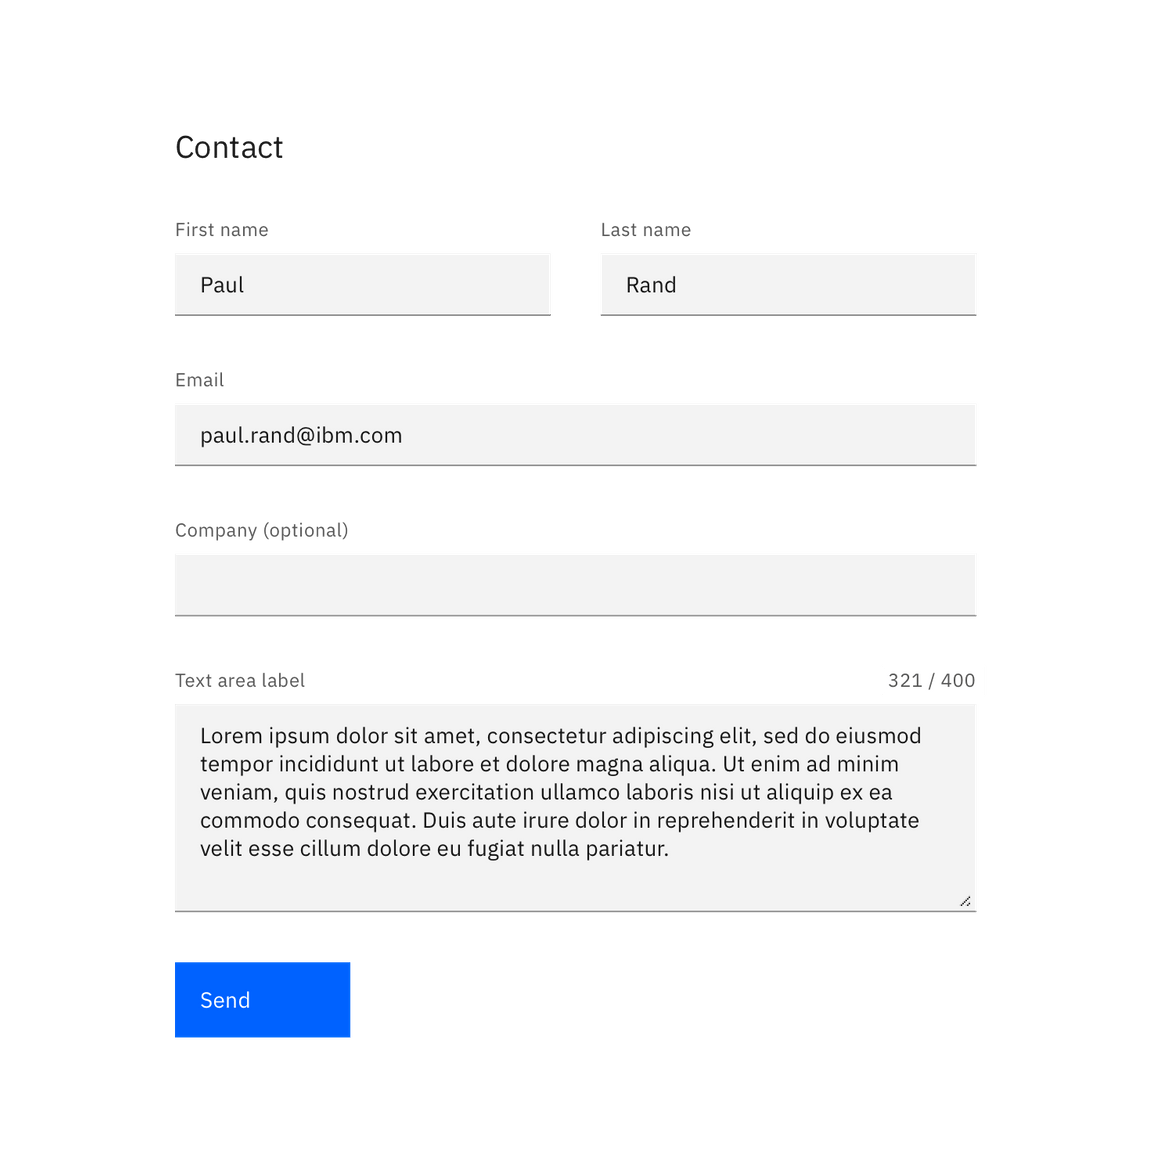 Primary button alignment in Forms